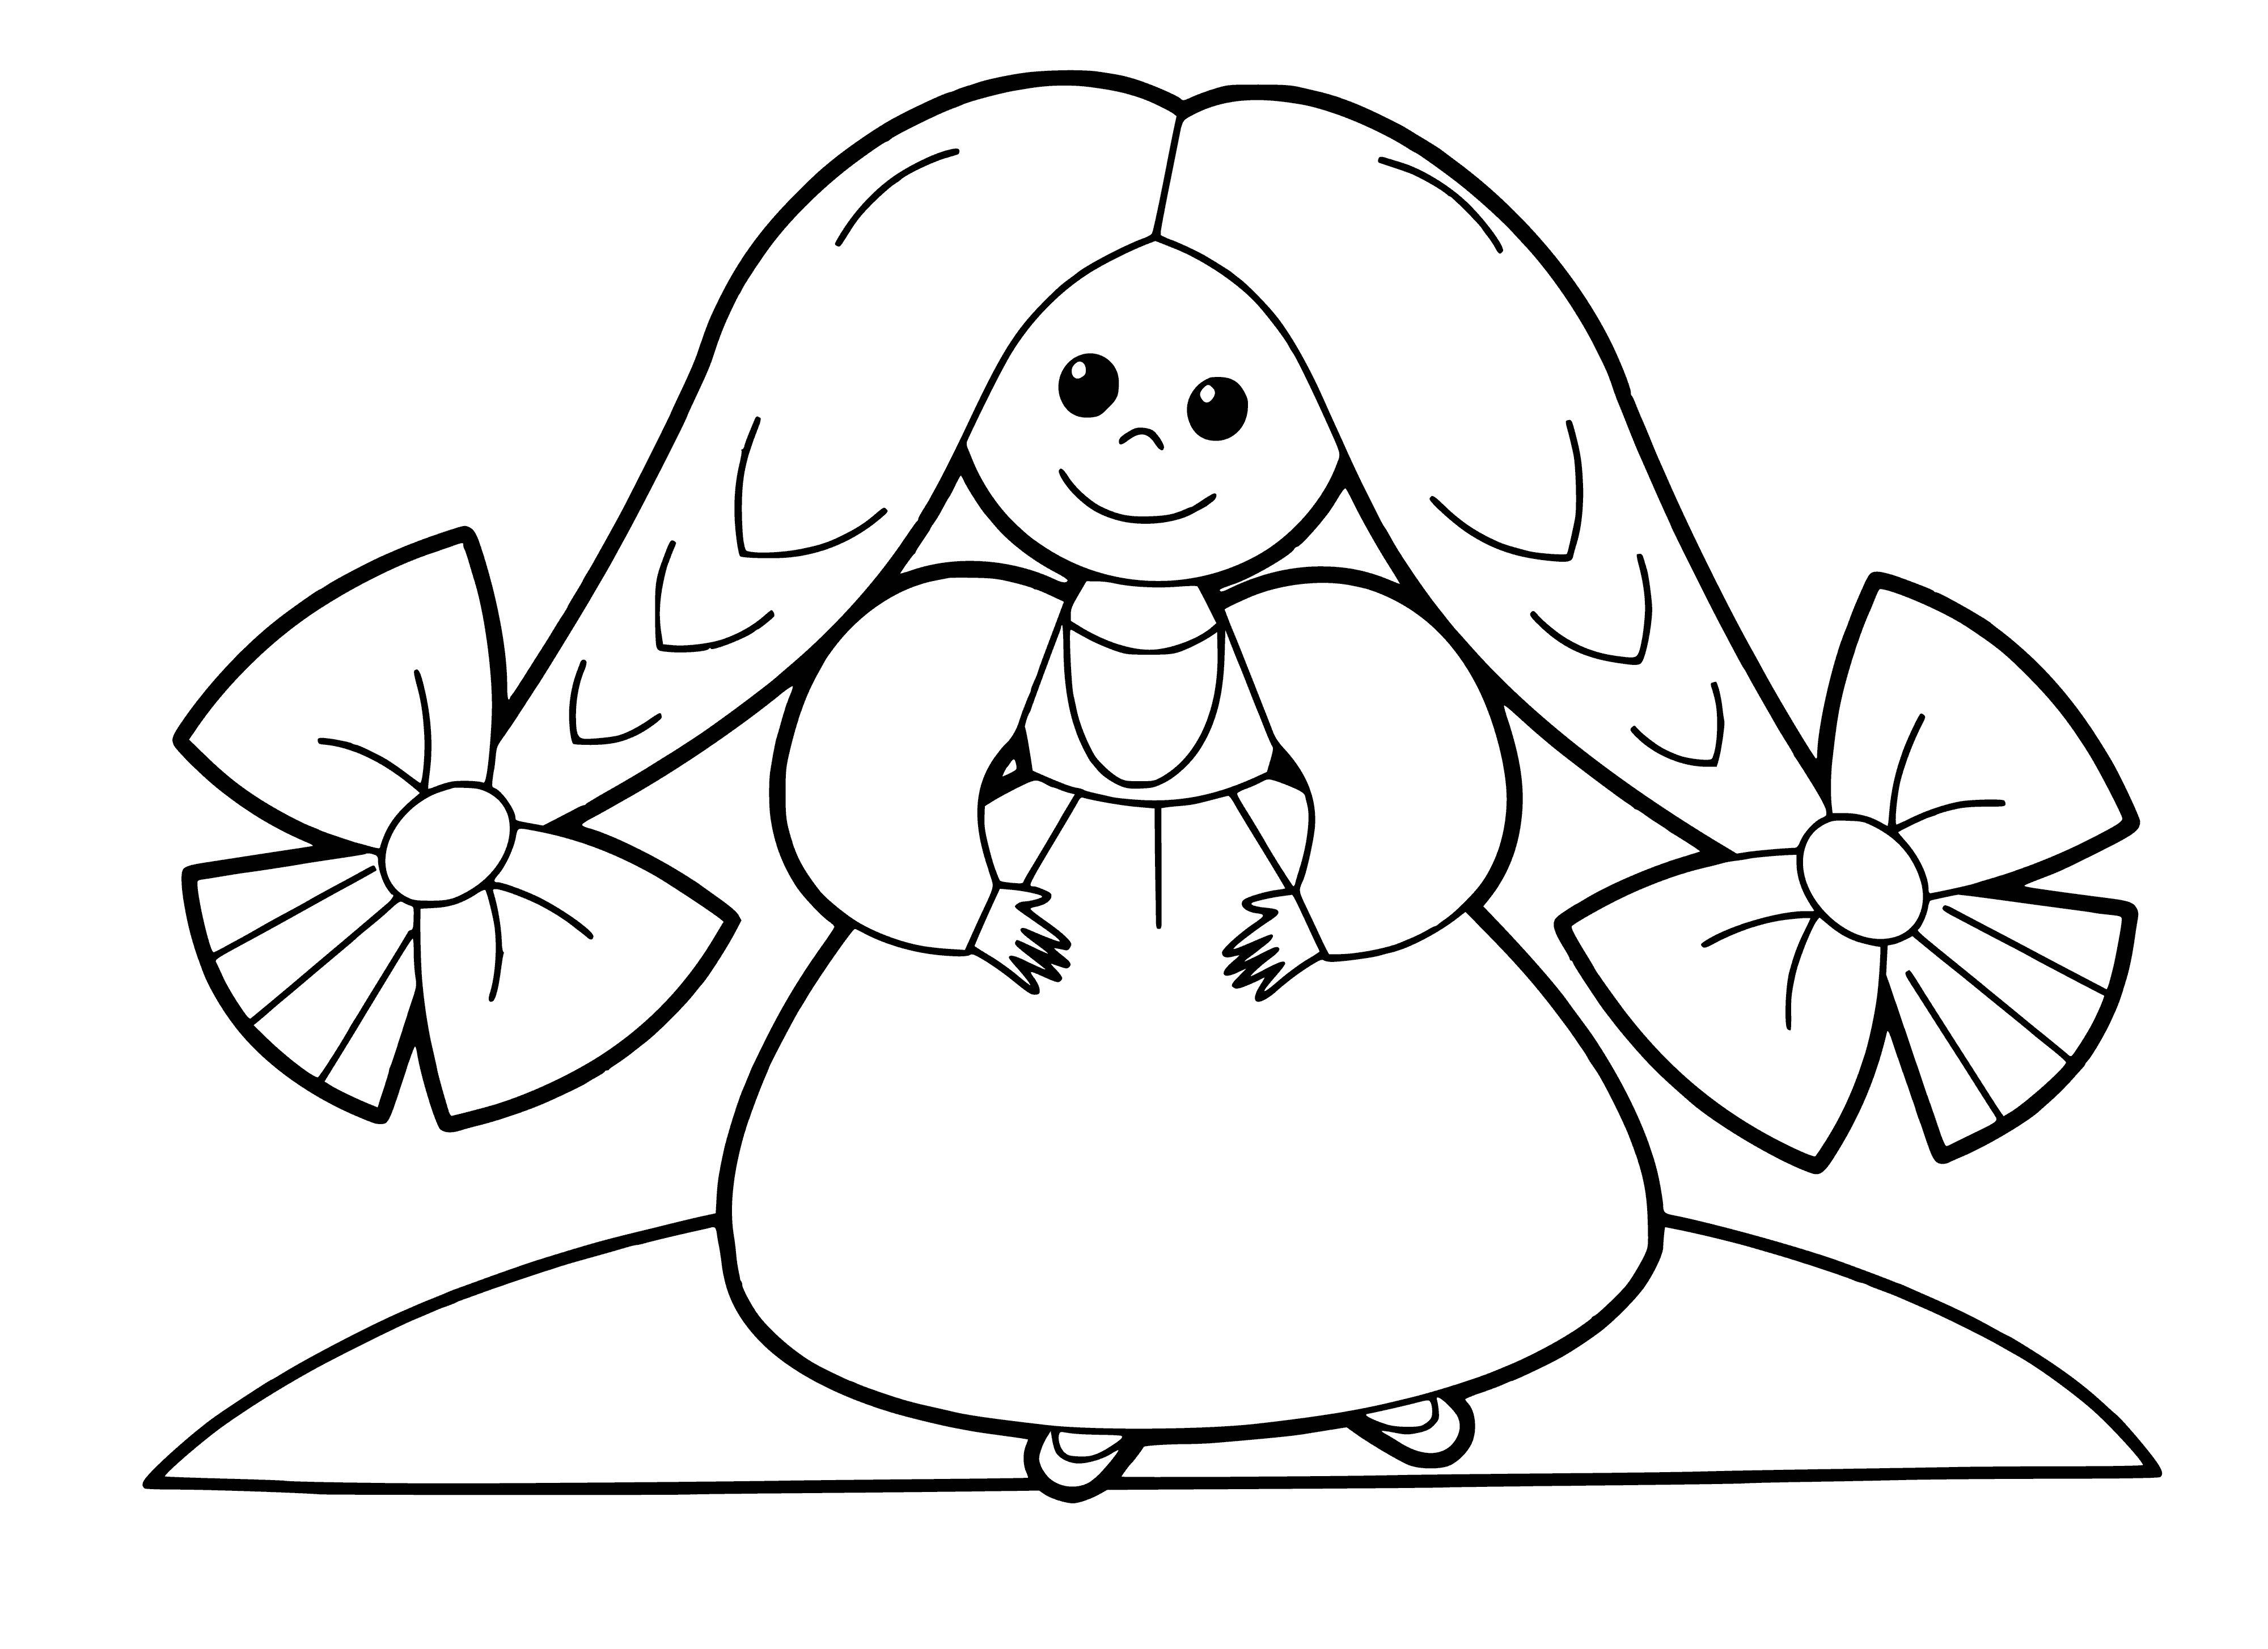 coloring page: Girl with braids wearing yellow dress in coloring page - great for kids to explore creativity!